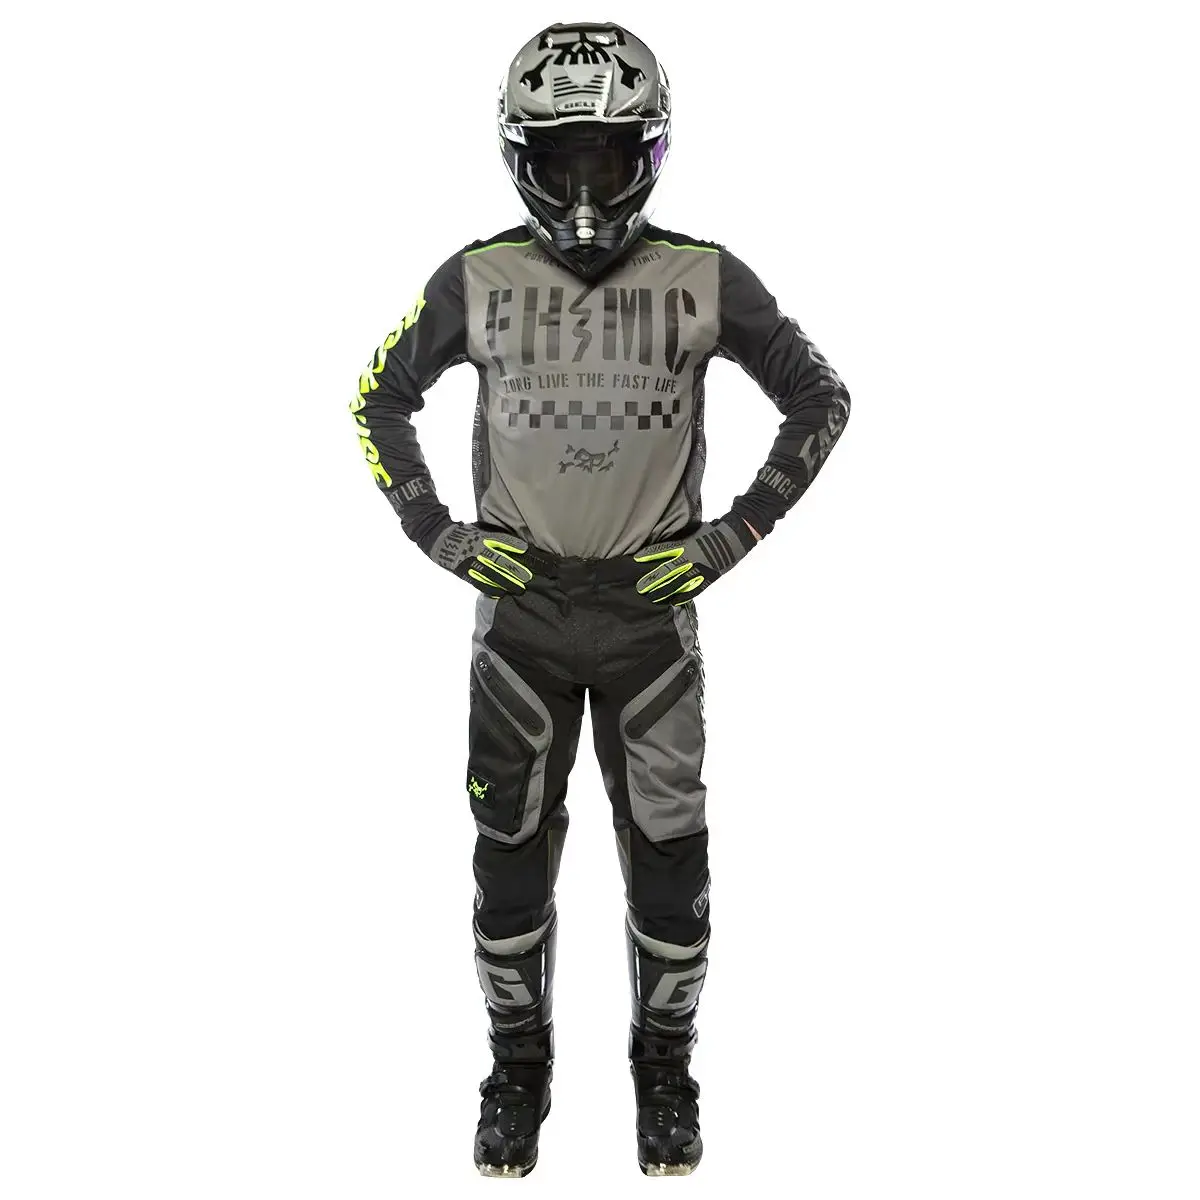 2023 fh Moto Suit Motocross Gear Set Off Road Jersey Set With Pocket Dirt Bike Jersey And Pants MX Racing Clothing